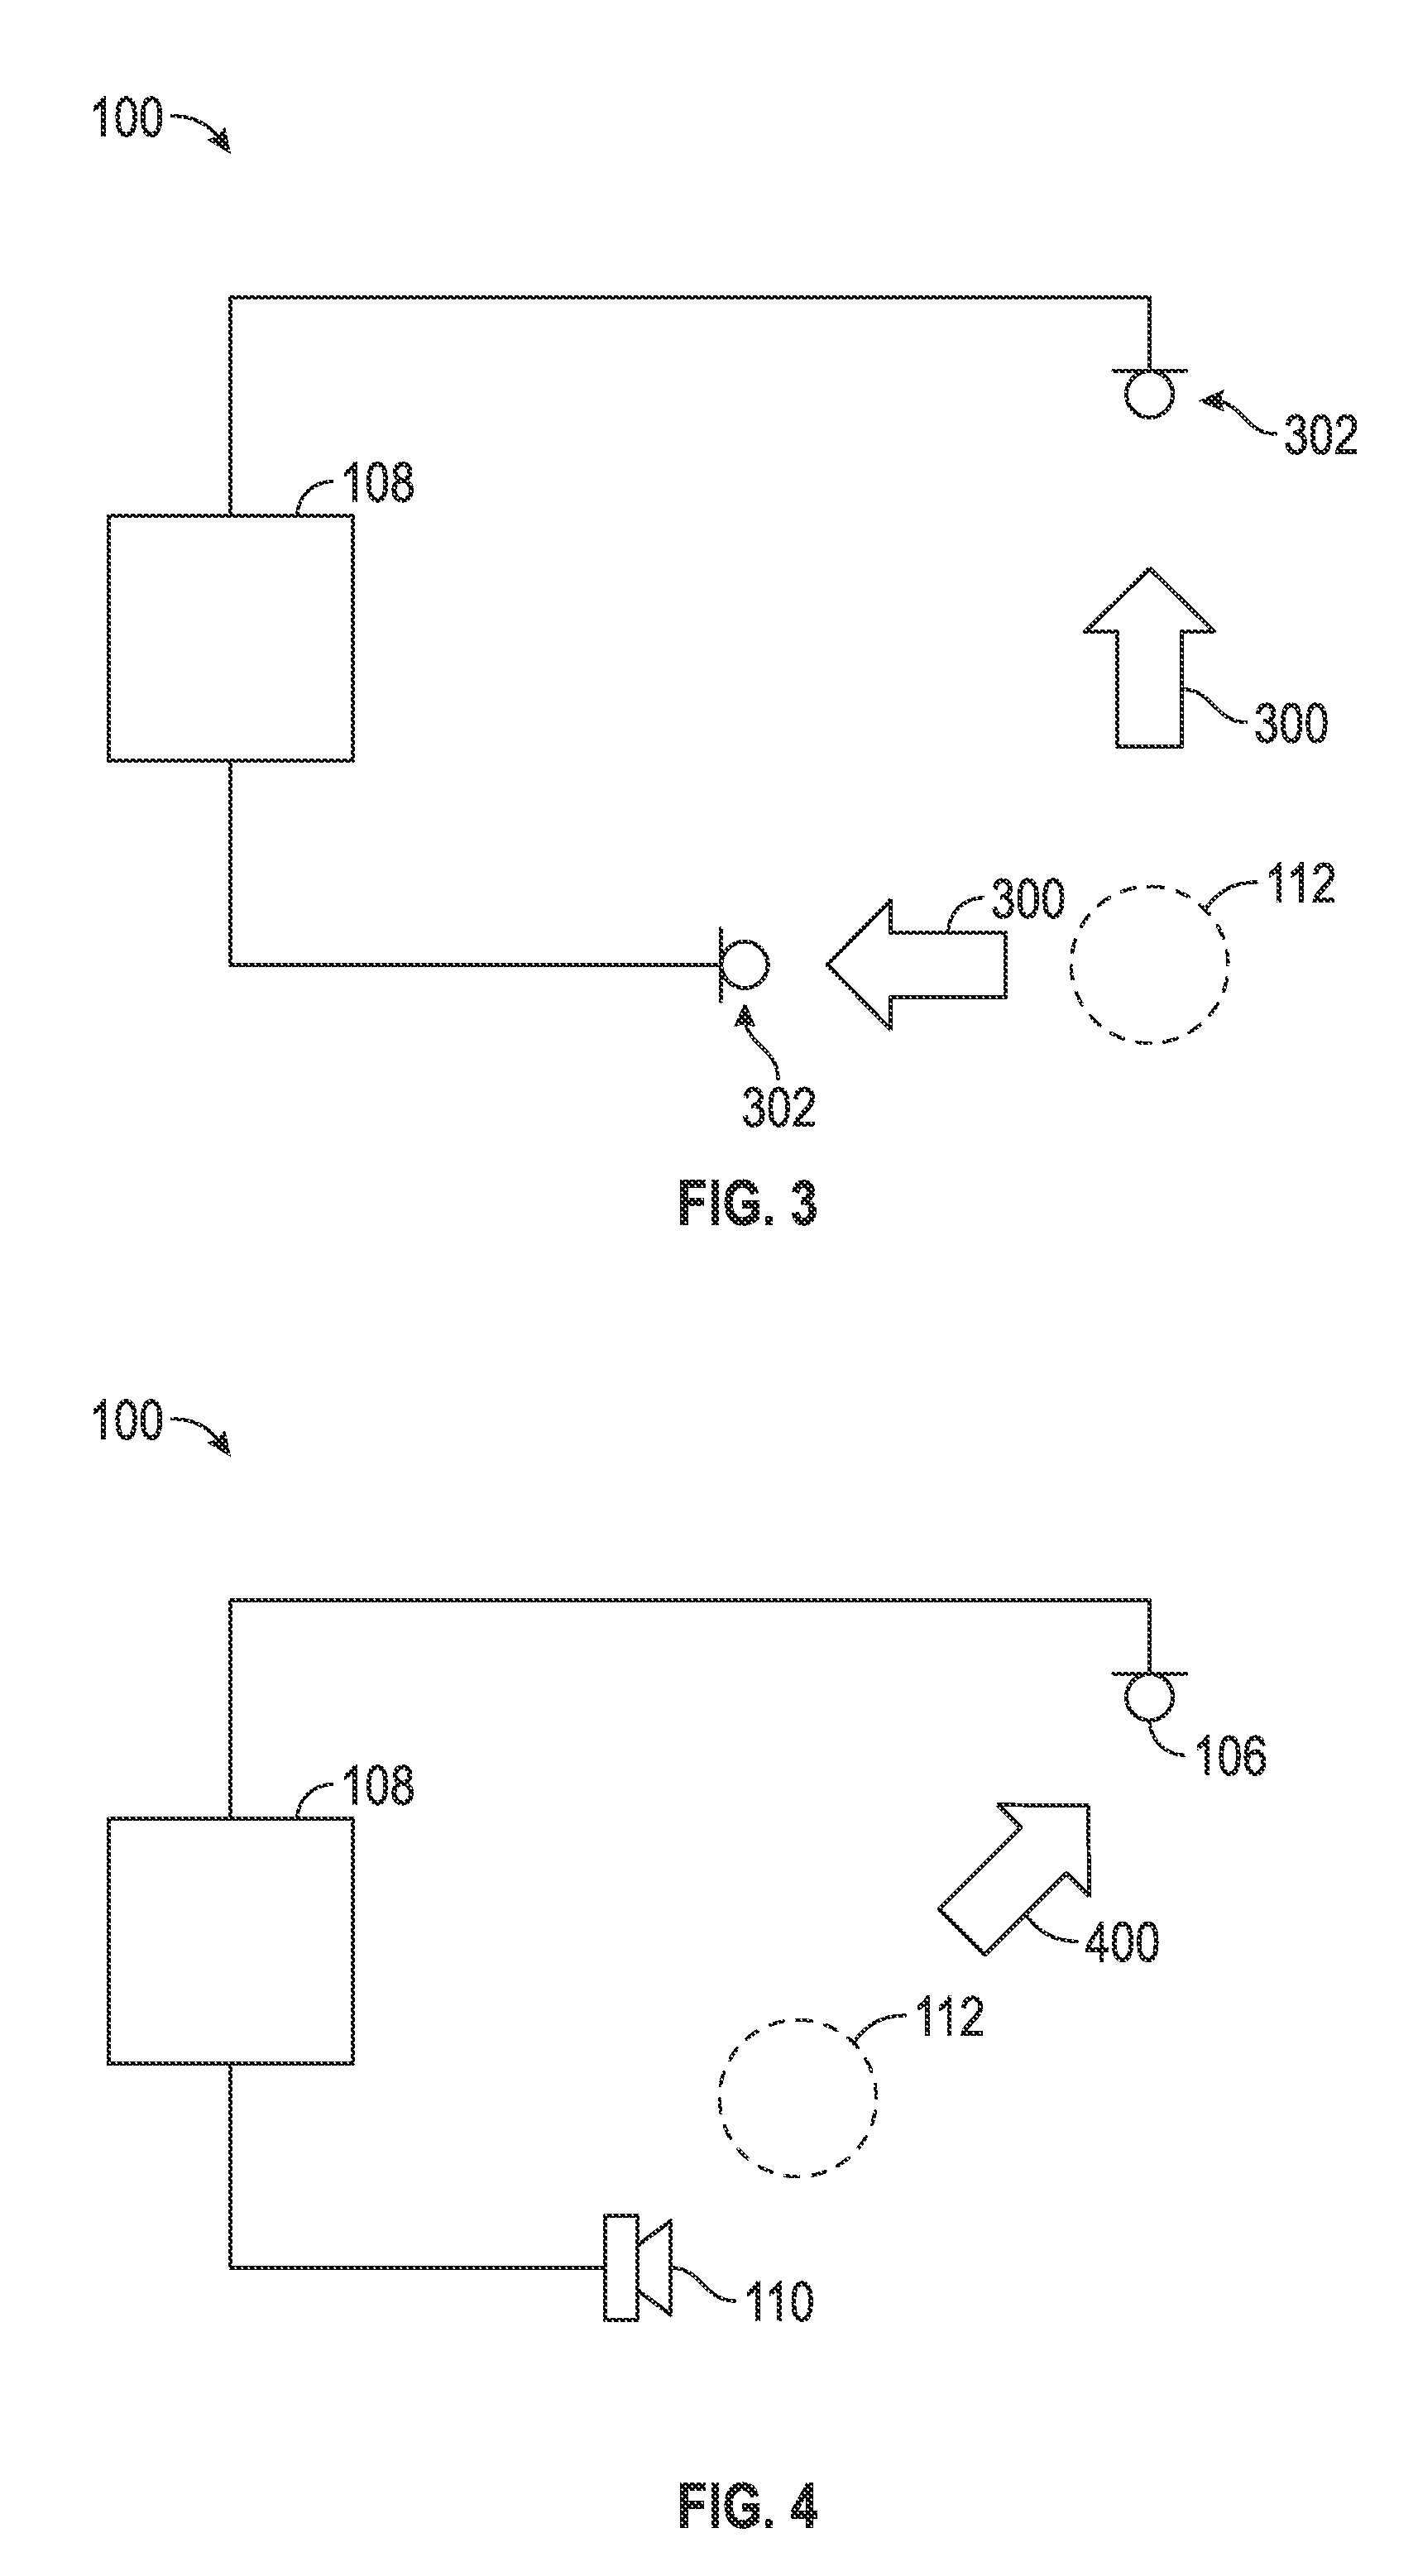 Systems and methods for controlling noise in a vehicle